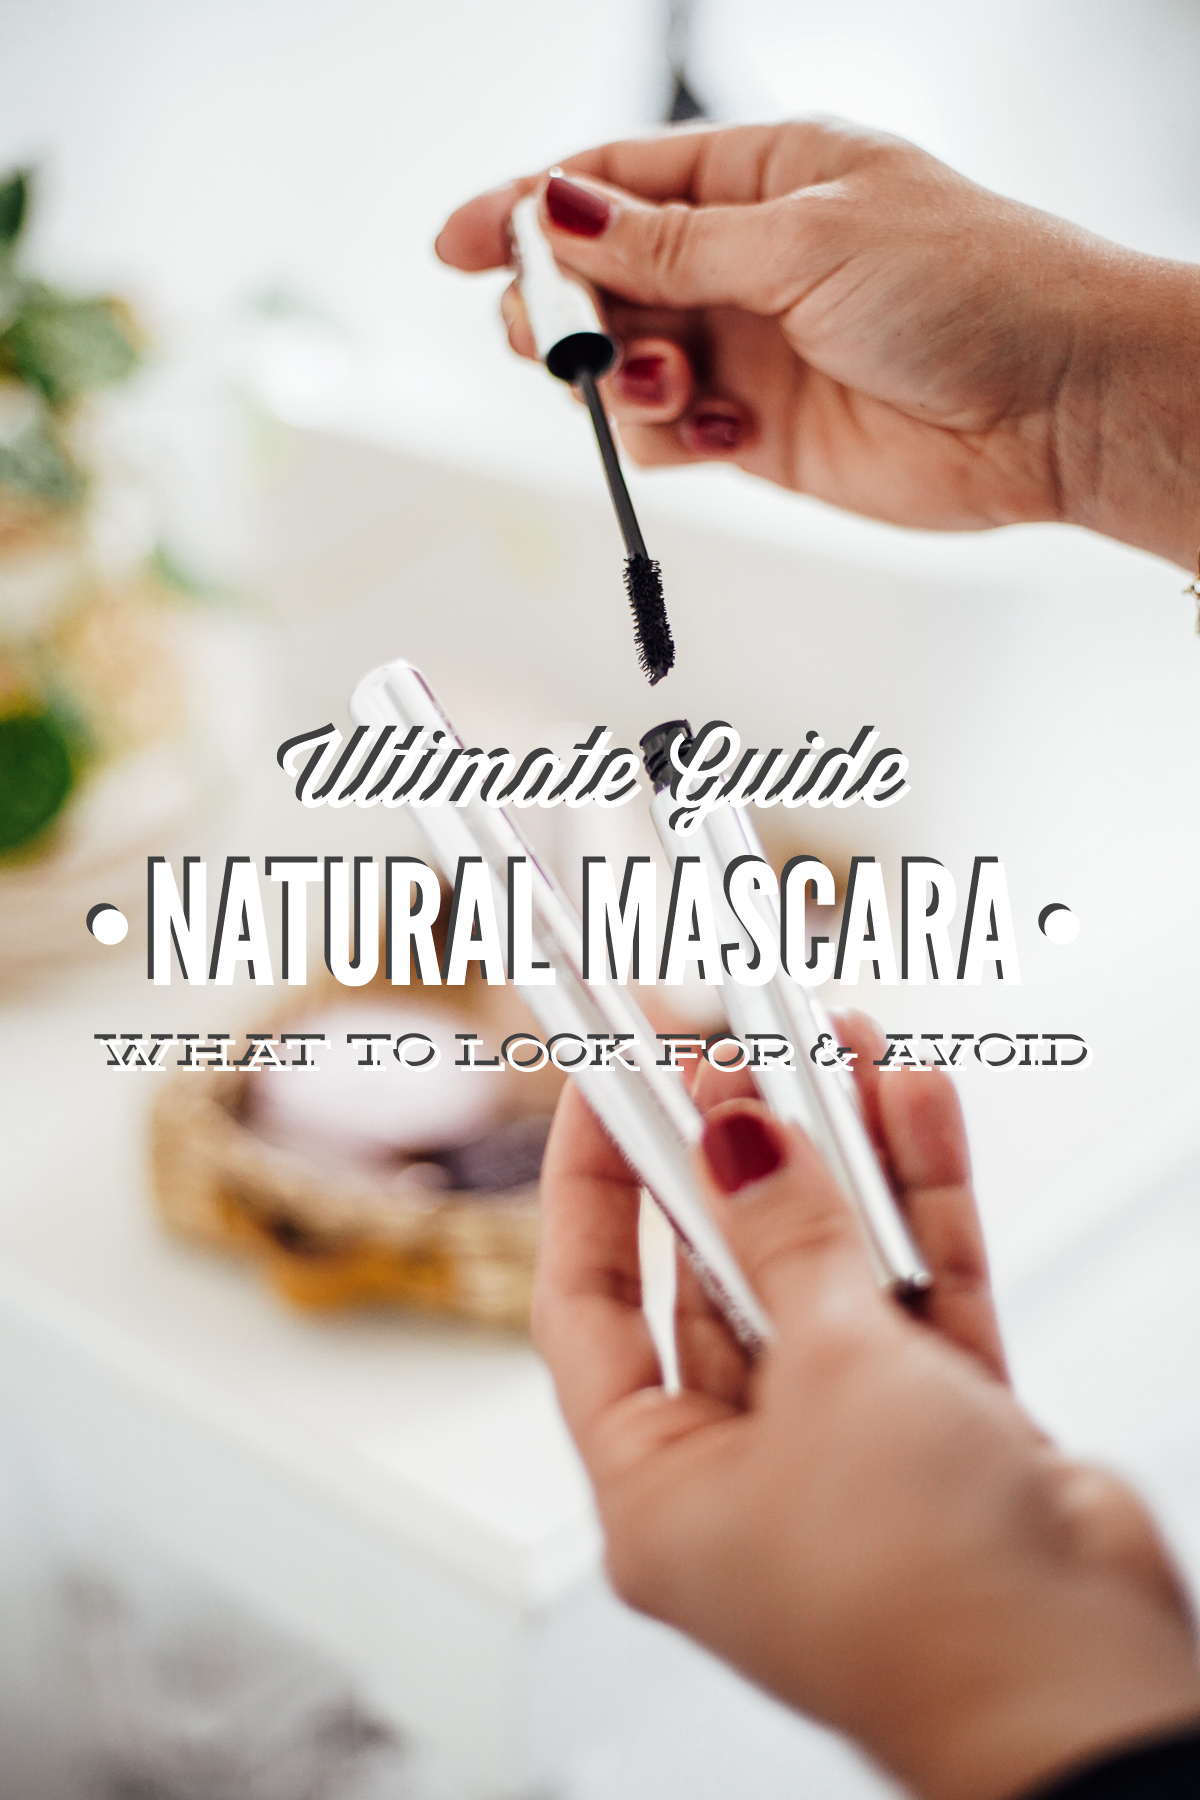 Natural Mascara Guide: What to Look for and Avoid